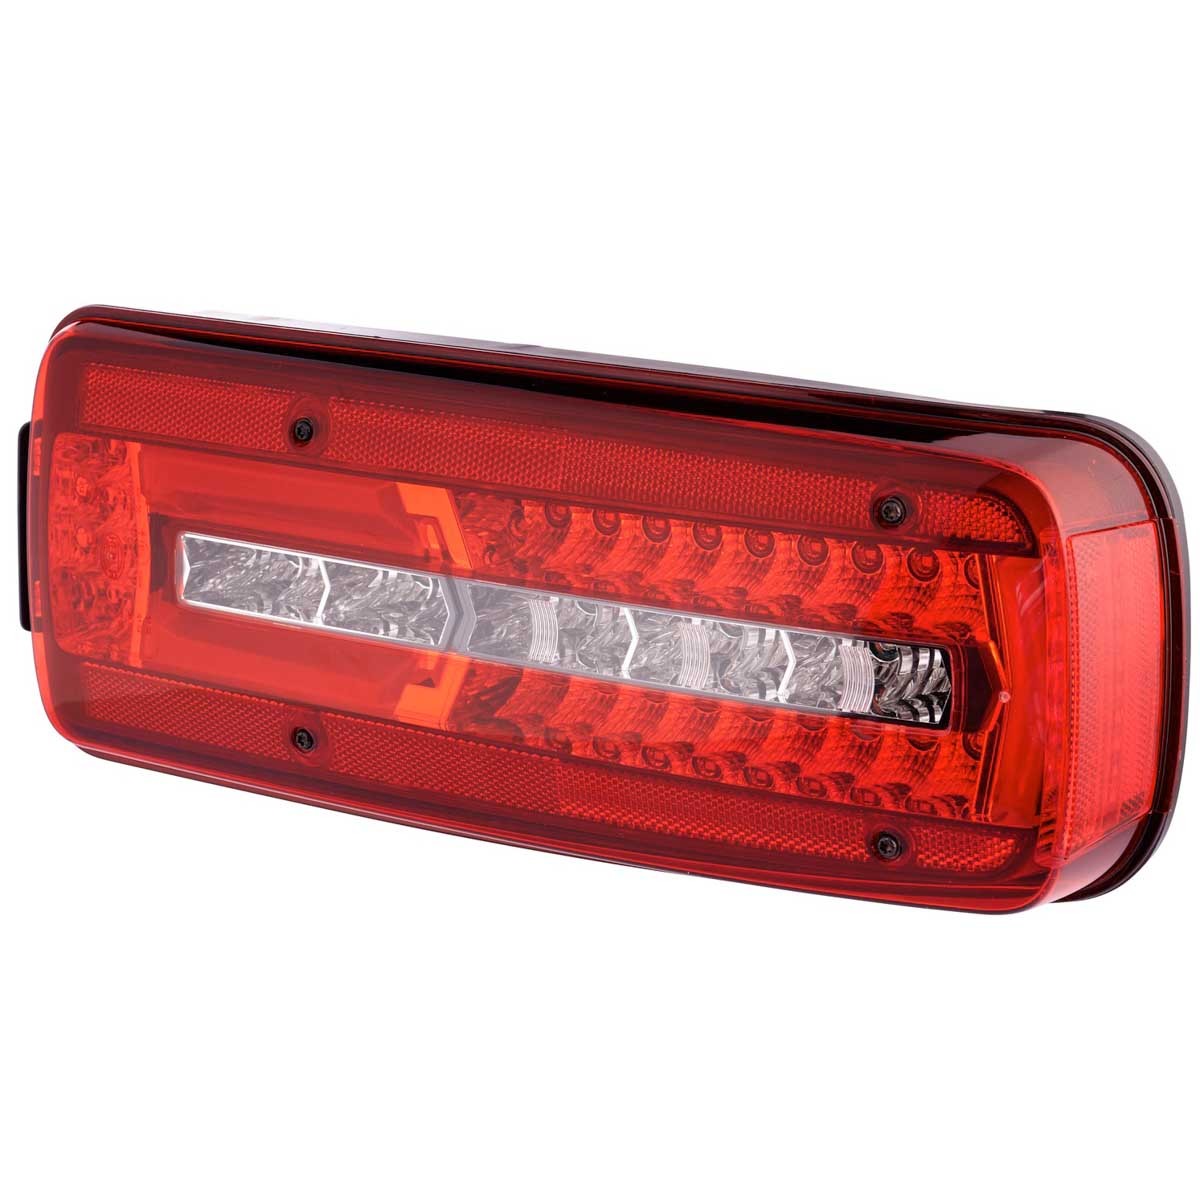 E24 5884 HELLA Right, LED, black, 24V, Crystal clear, red, Electromagnetic Compatibility (EMC), with bolts/screws Housing Colour: black, Lens Colour: Crystal clear, red Tail light 2VP 012 381-021 buy